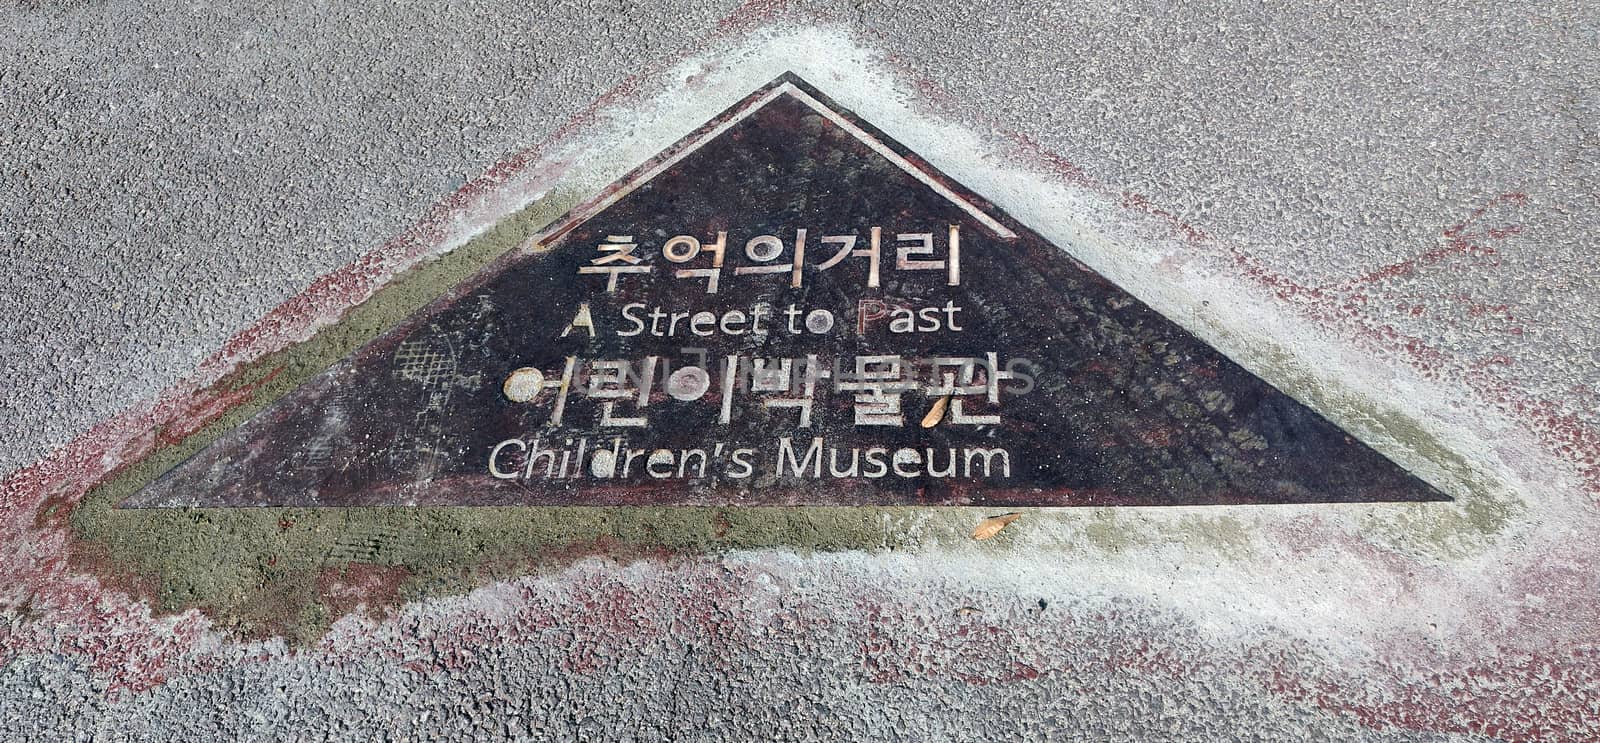 A street of past and children museum sign board engraved on road in National Folk Museum of Korea in Seoul, South Korea